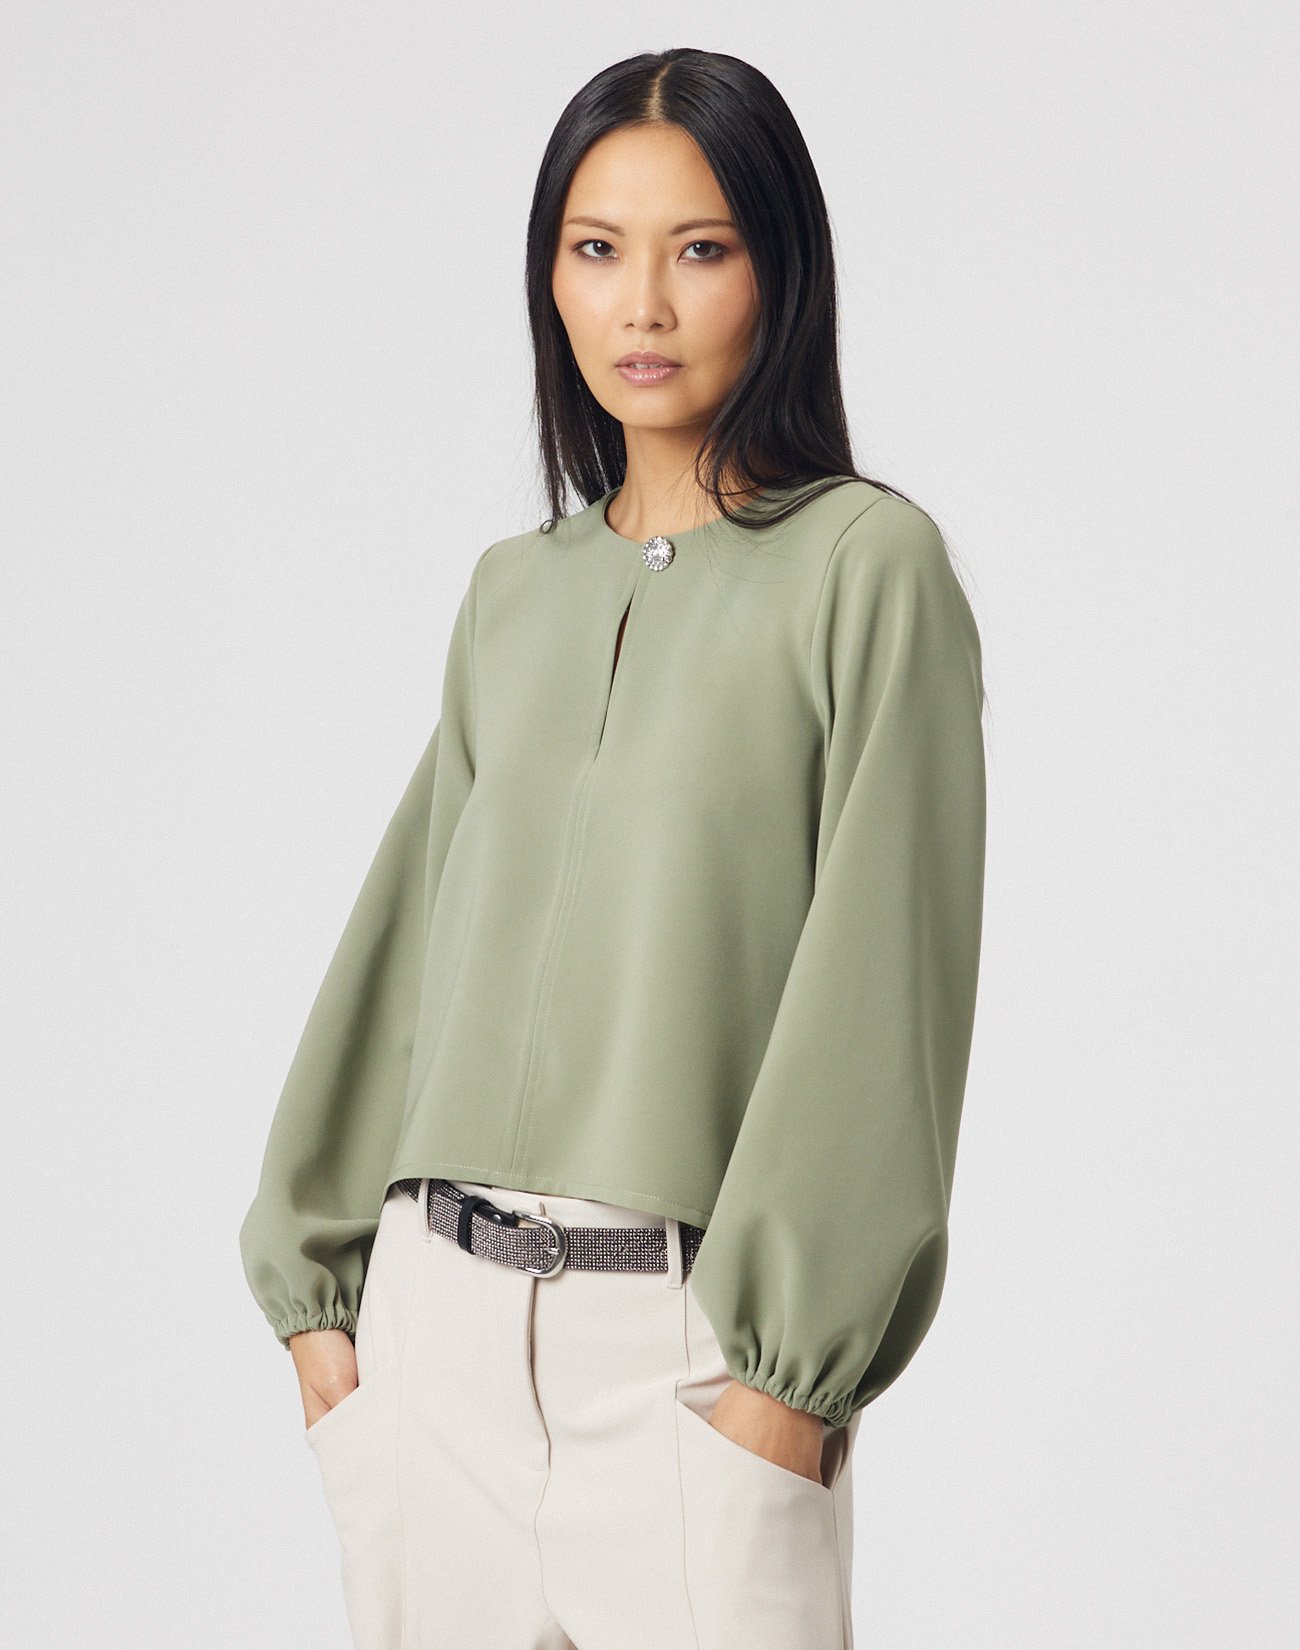 Asymmetric blouse with jewel button